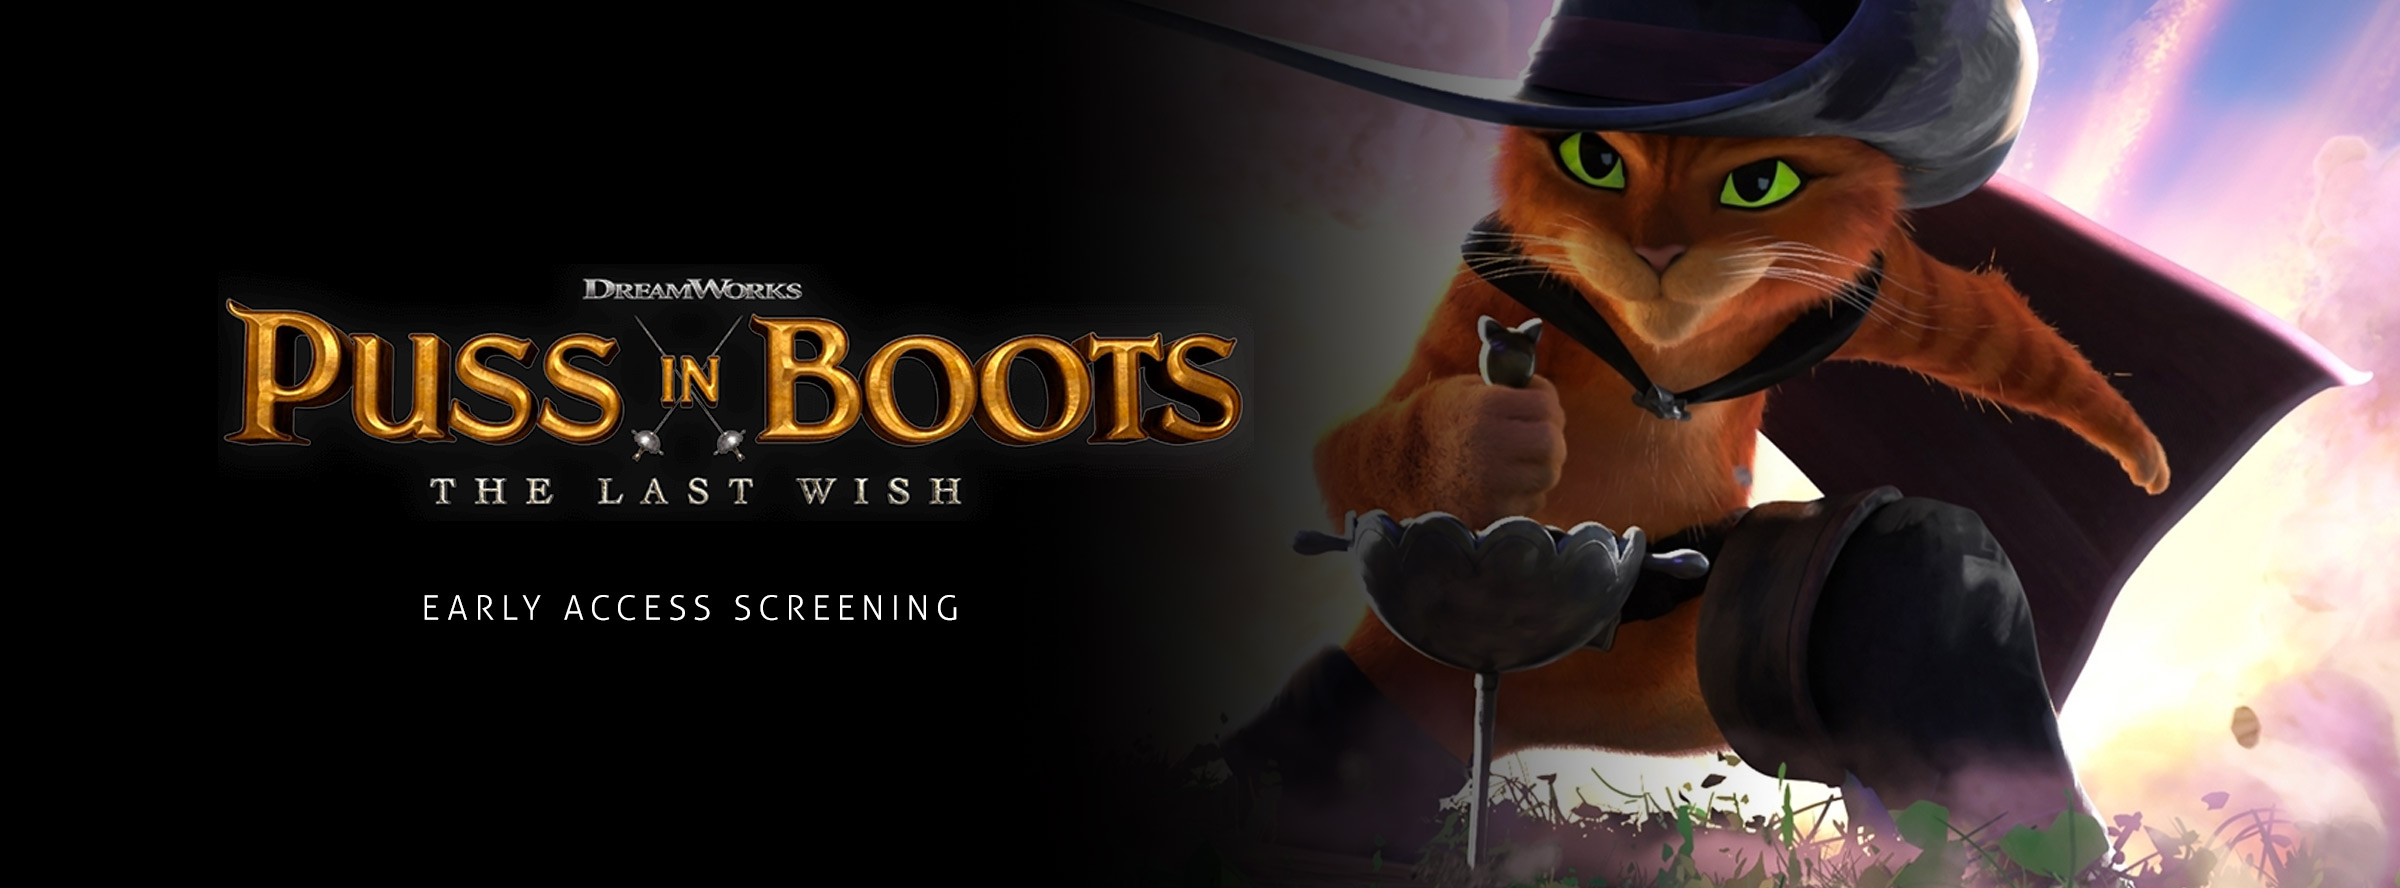 Slider Image for Puss in Boots: The Last Wish - Early Access